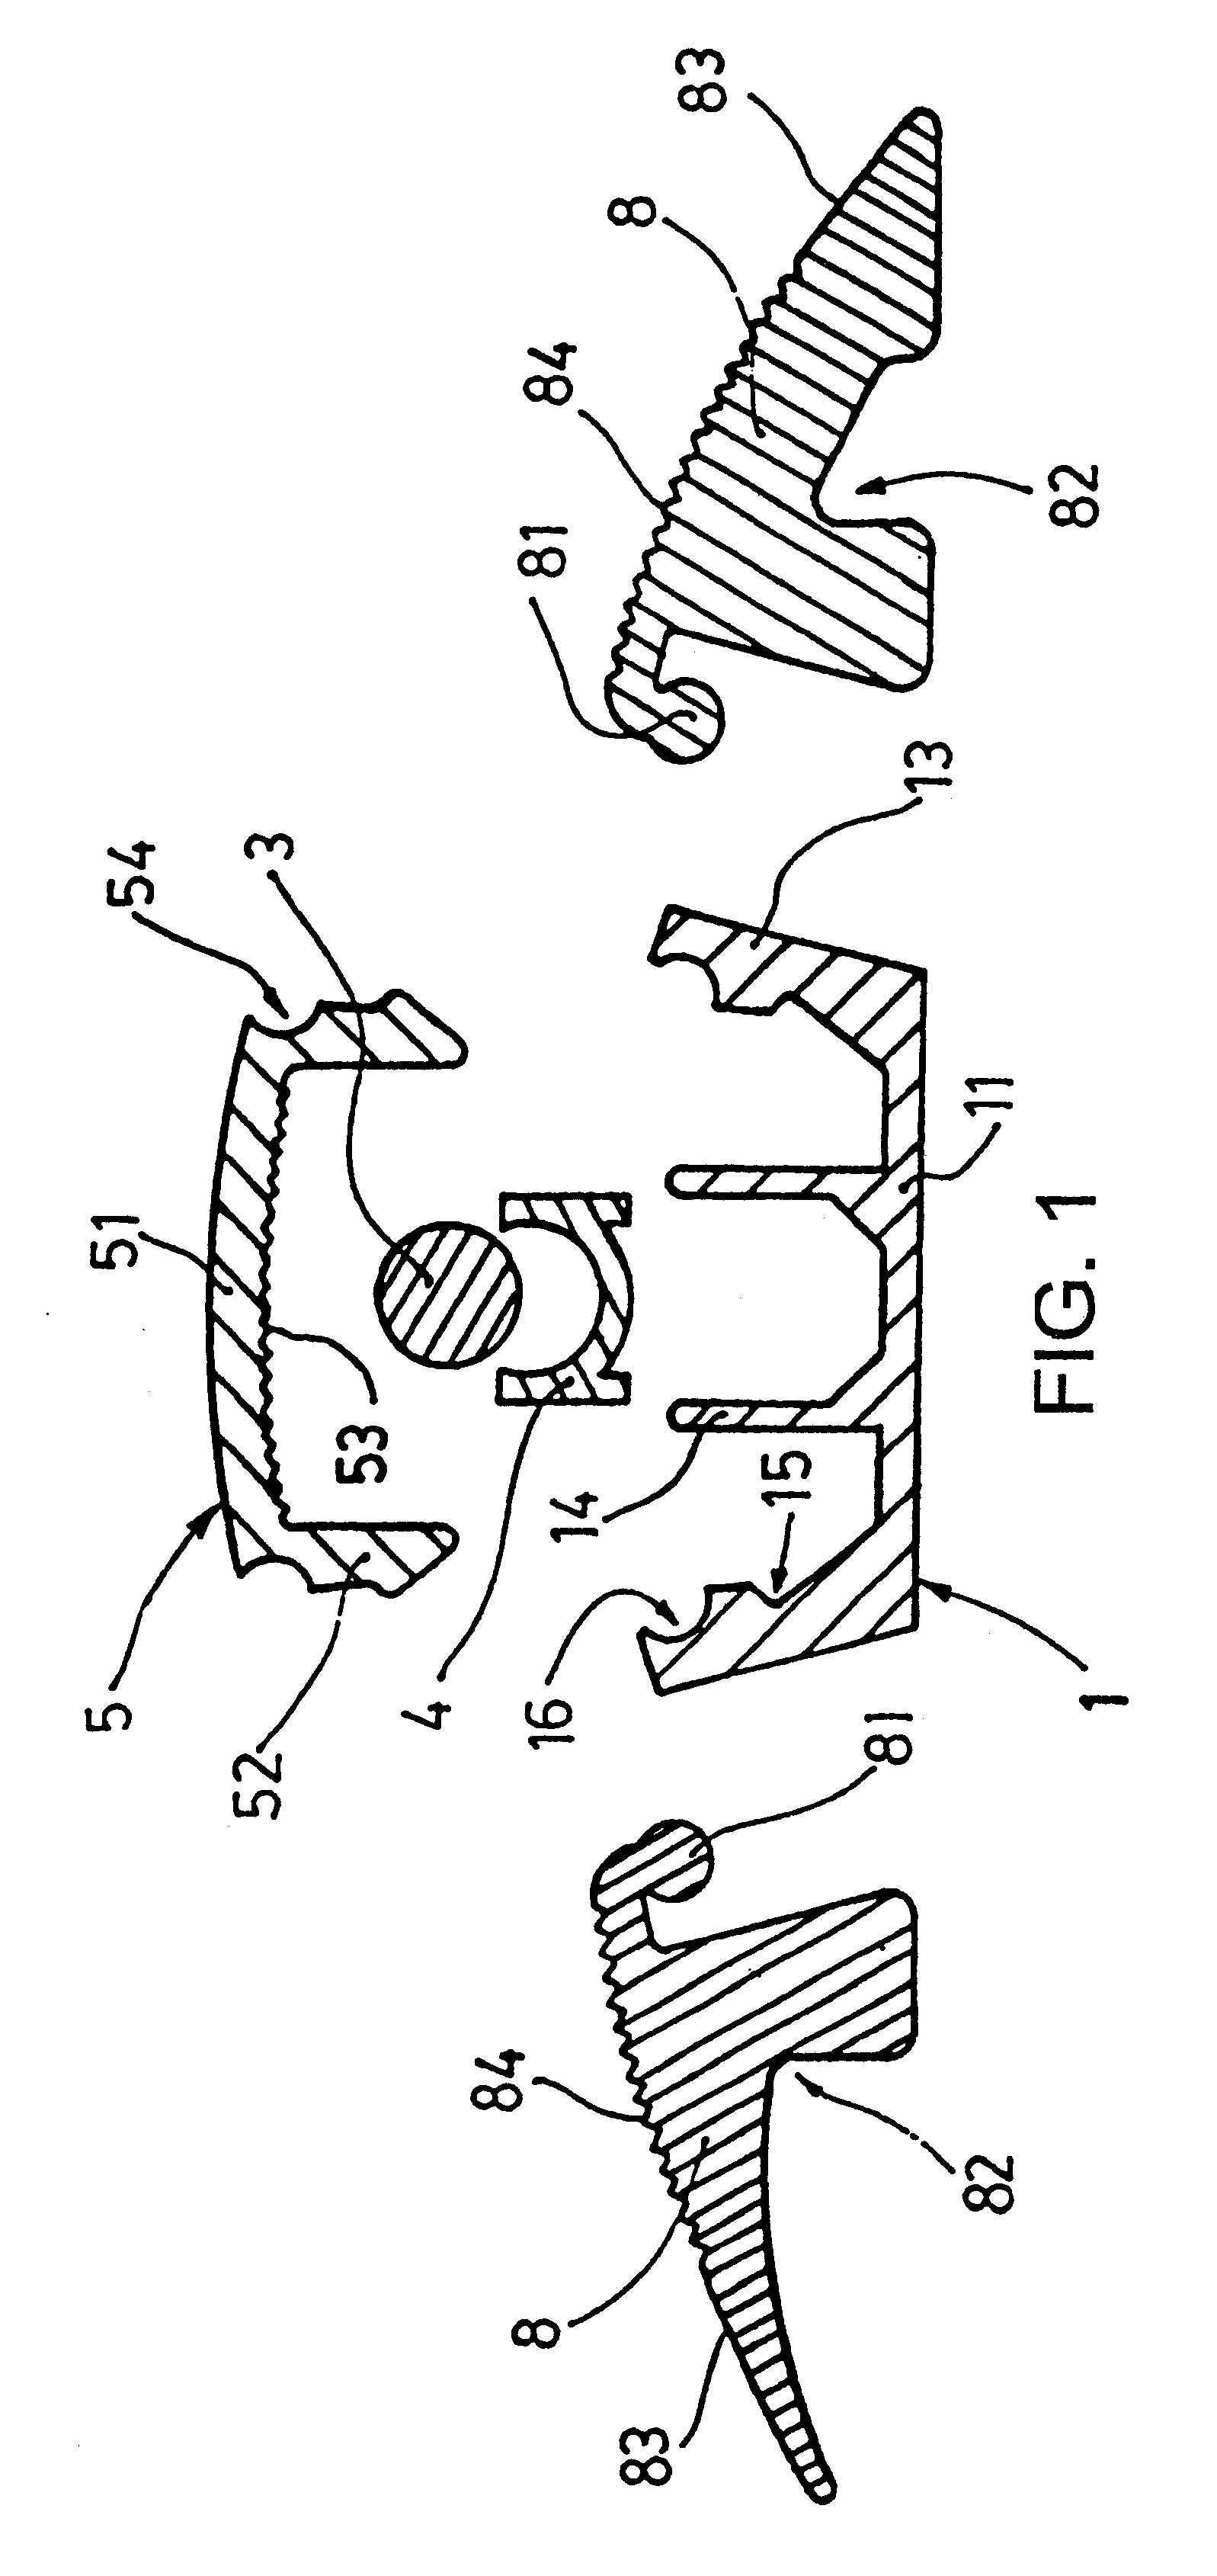 Light signaling device for floors